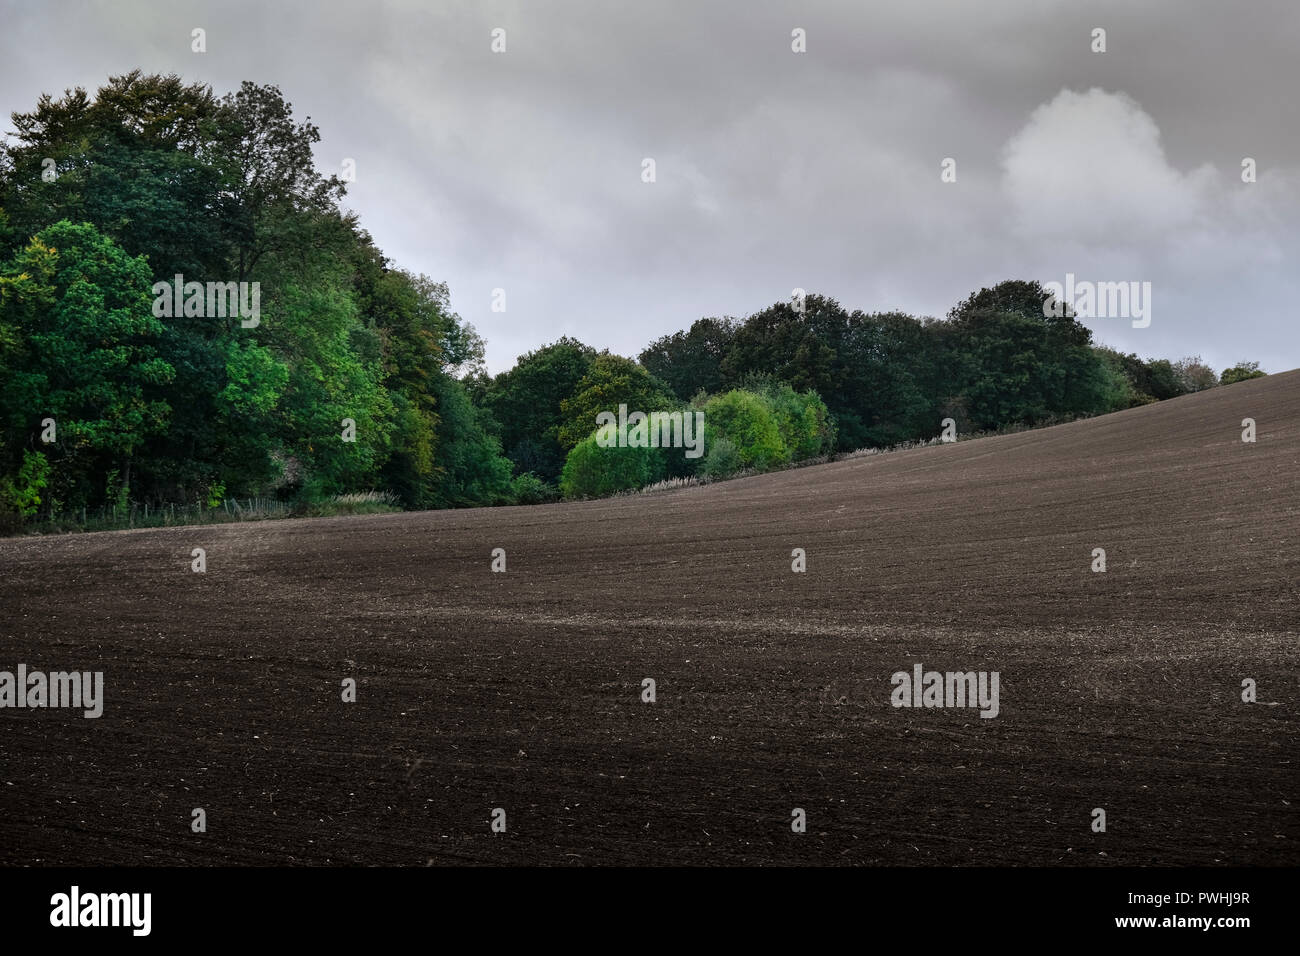 Farming / agriculture cultivated soil in a field in the English Countryside Stock Photo